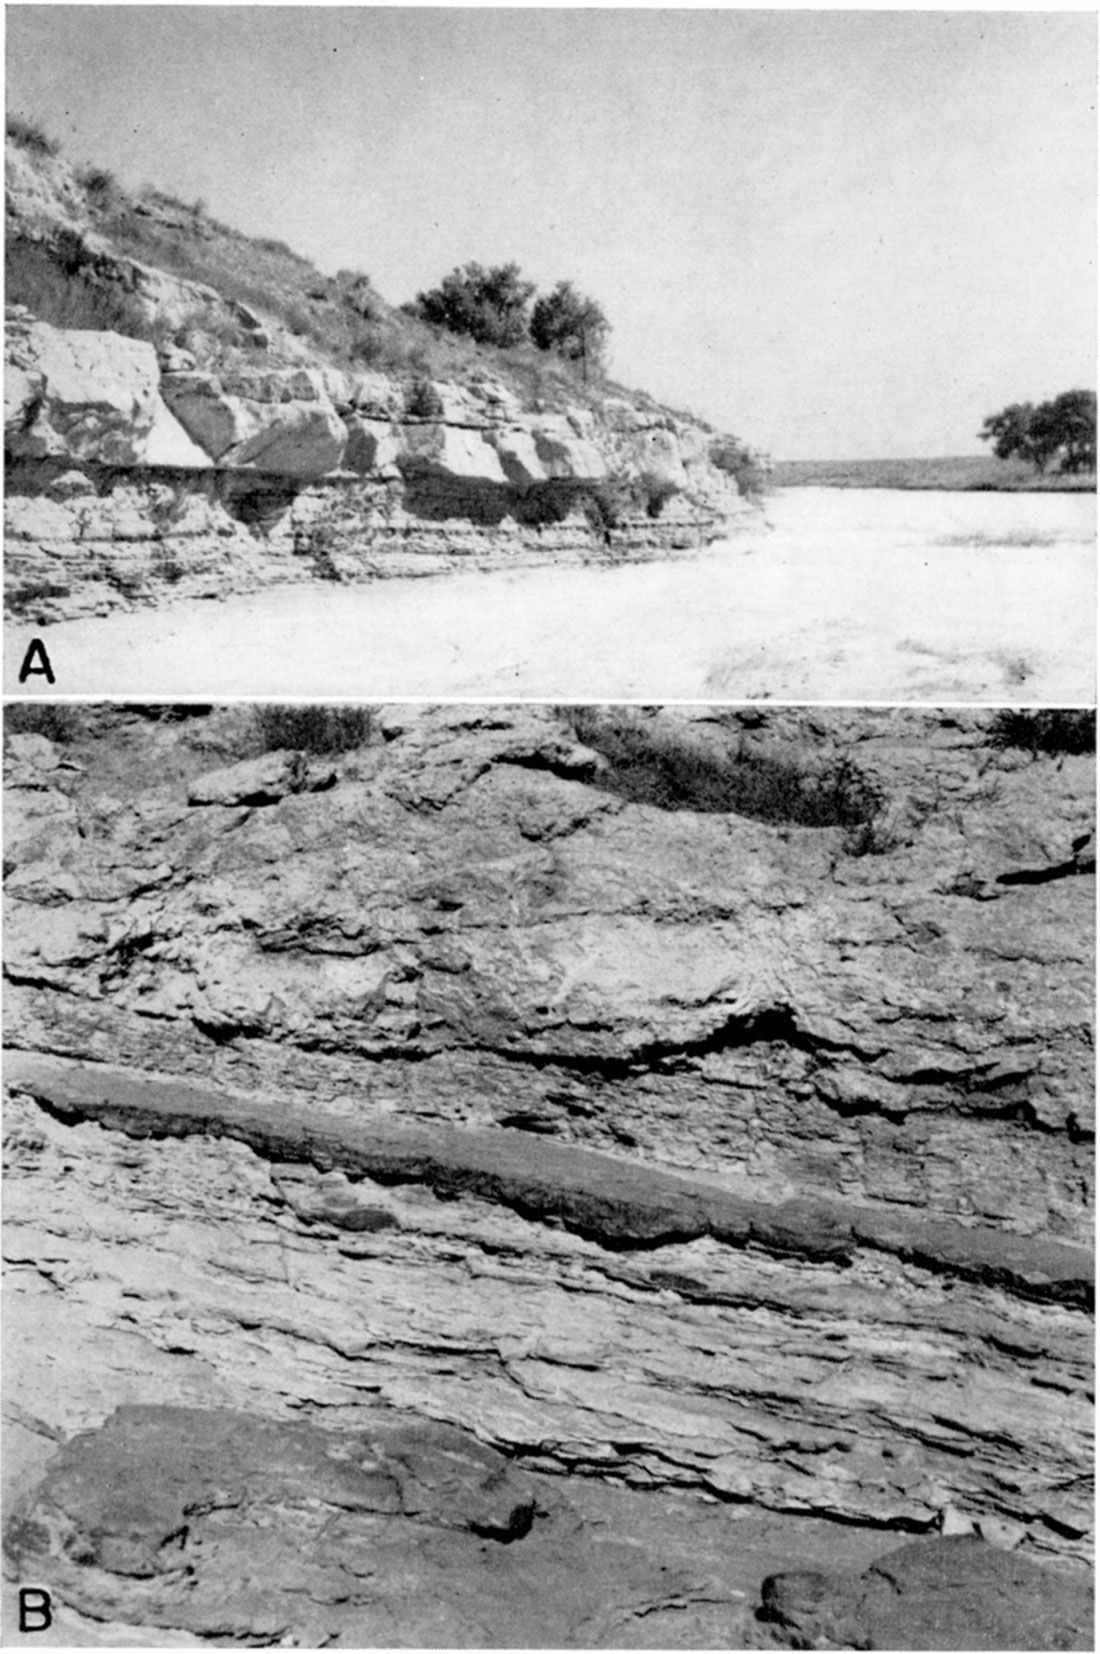 Two black and white photos; top is ledge of Cockrum sandstone along Bear creek; bottom is outcrop of shale in the Cockrum sandstone on north side of Bear creek.